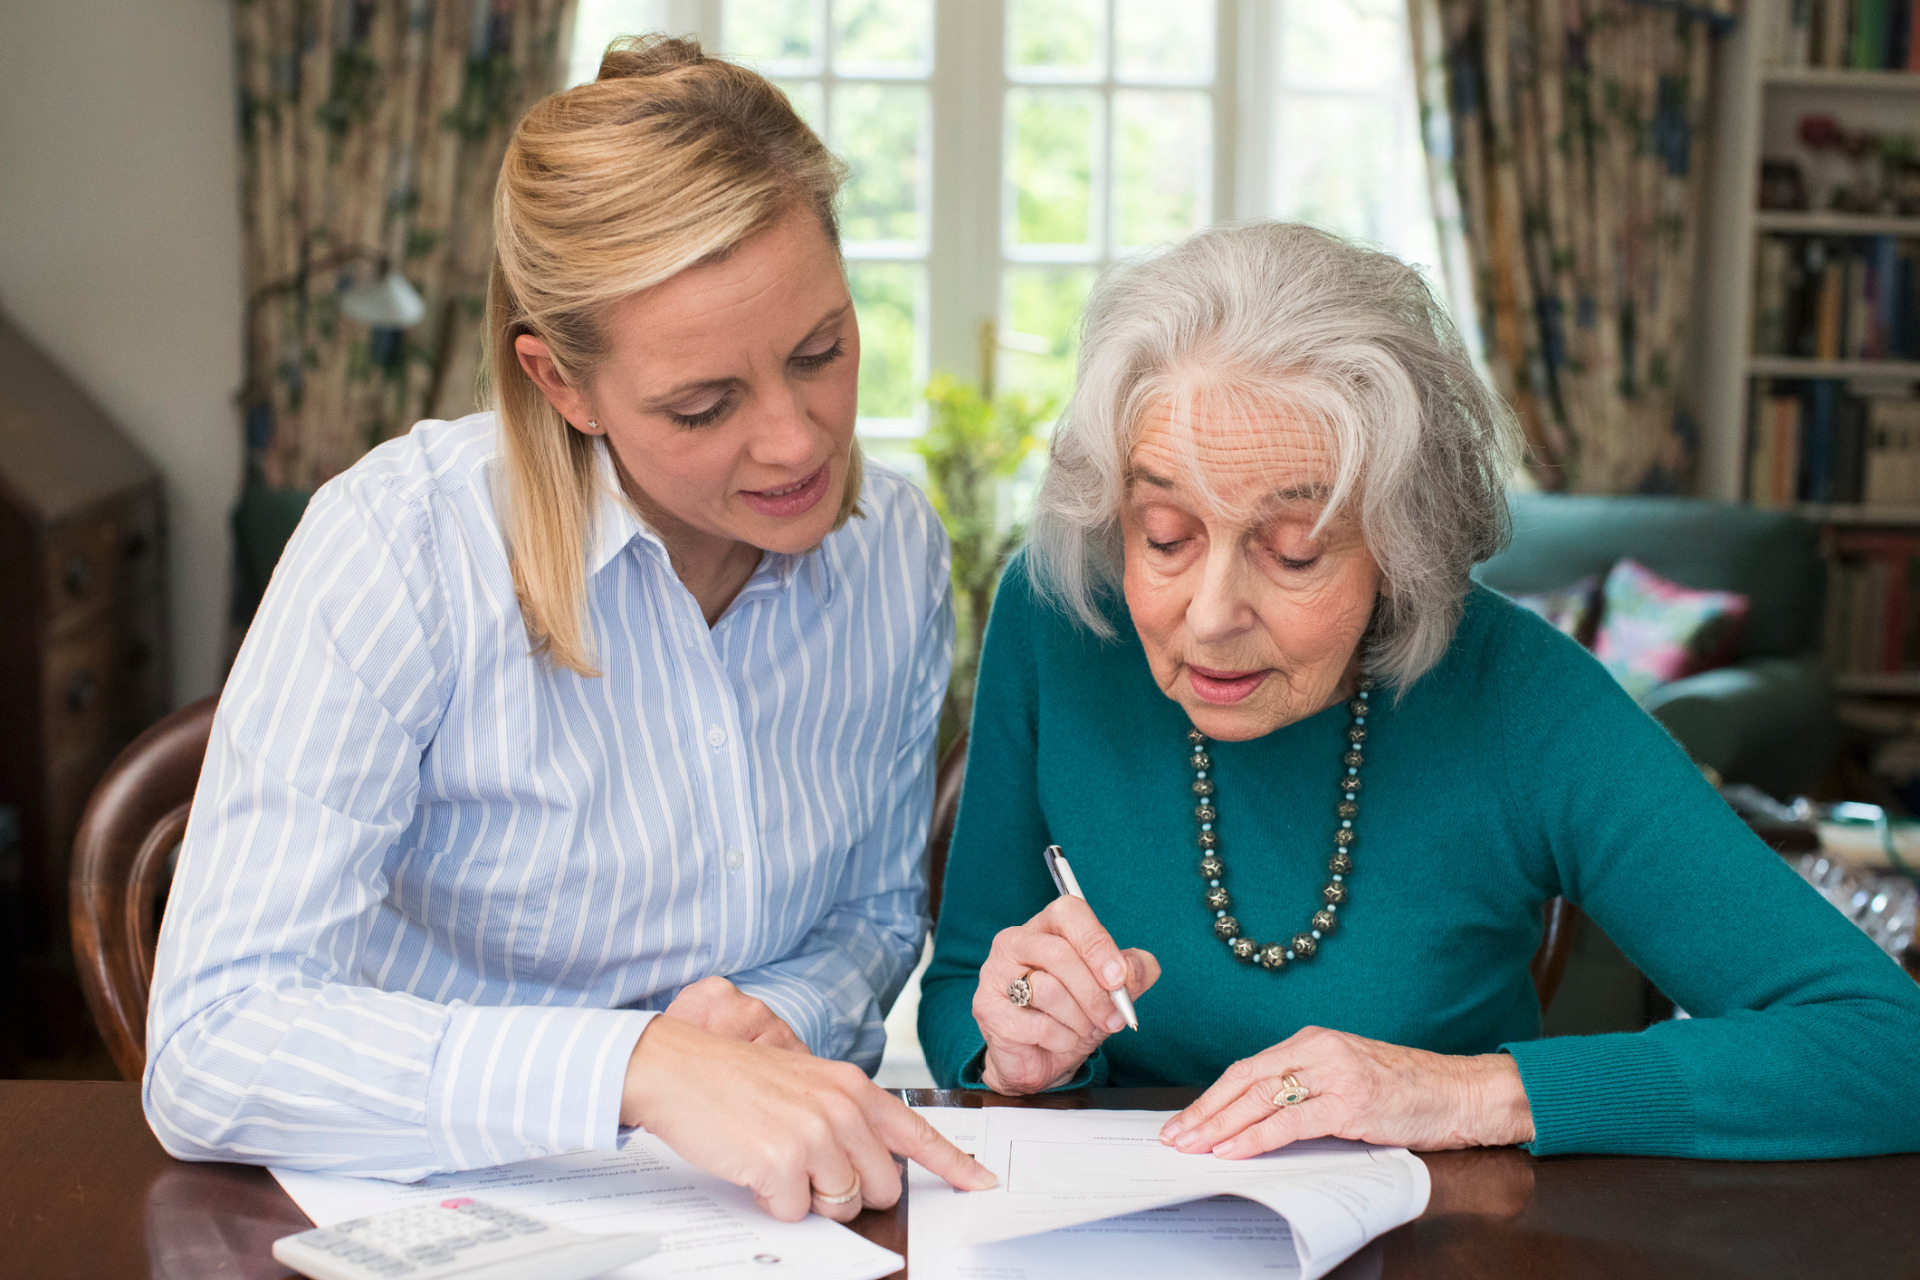 A lady helping an older lady to read through some documents.